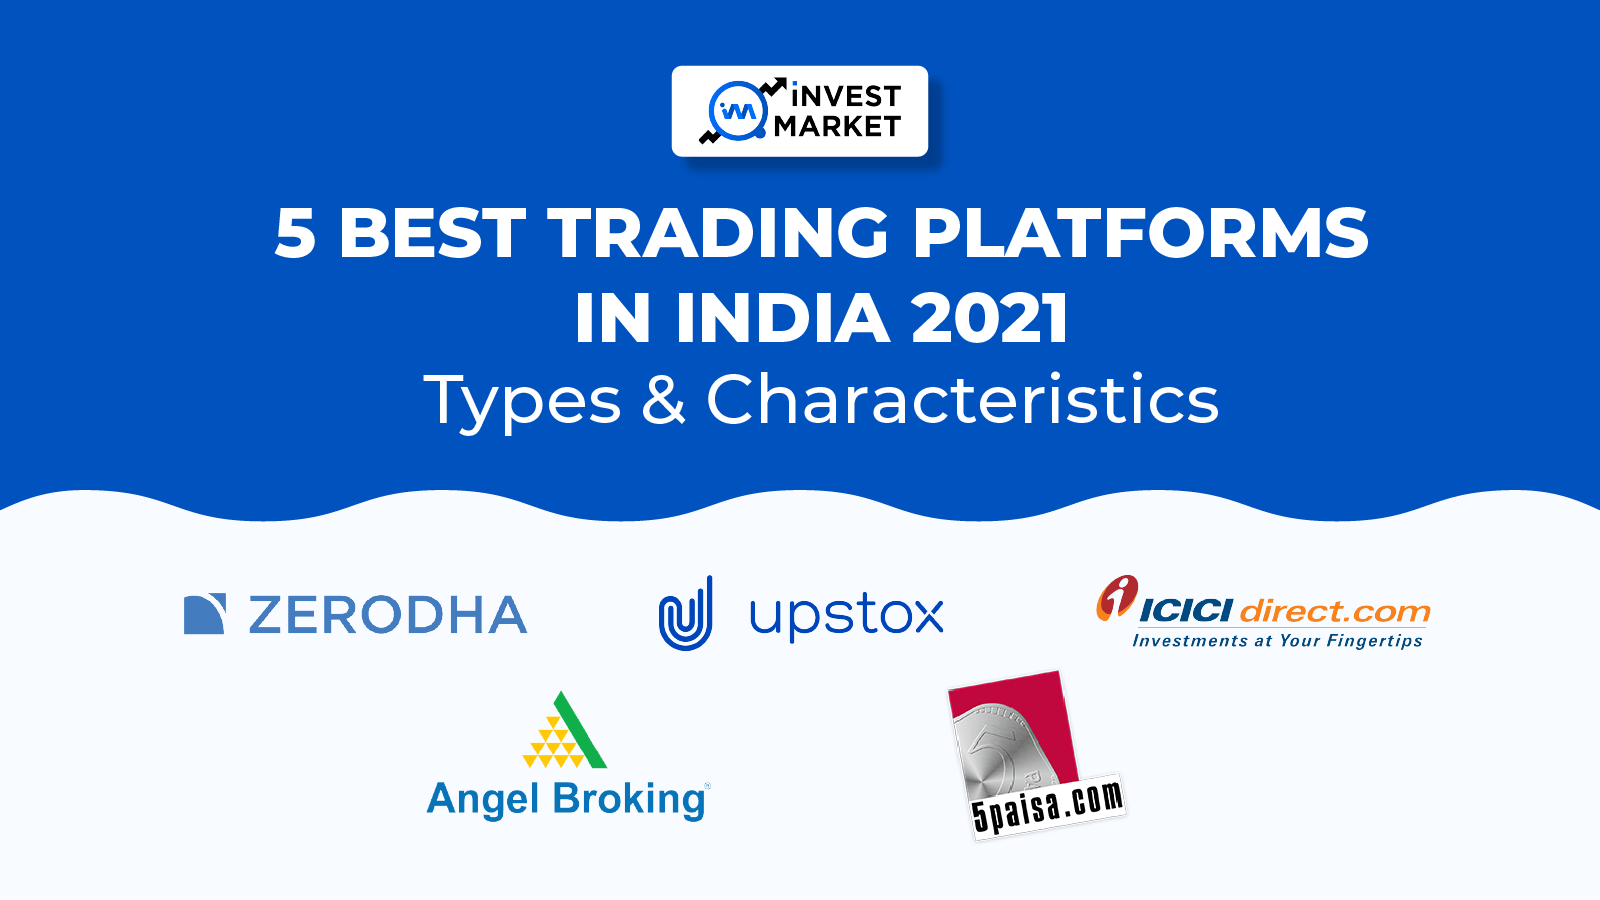 5 Best Trading Platforms In India 2021